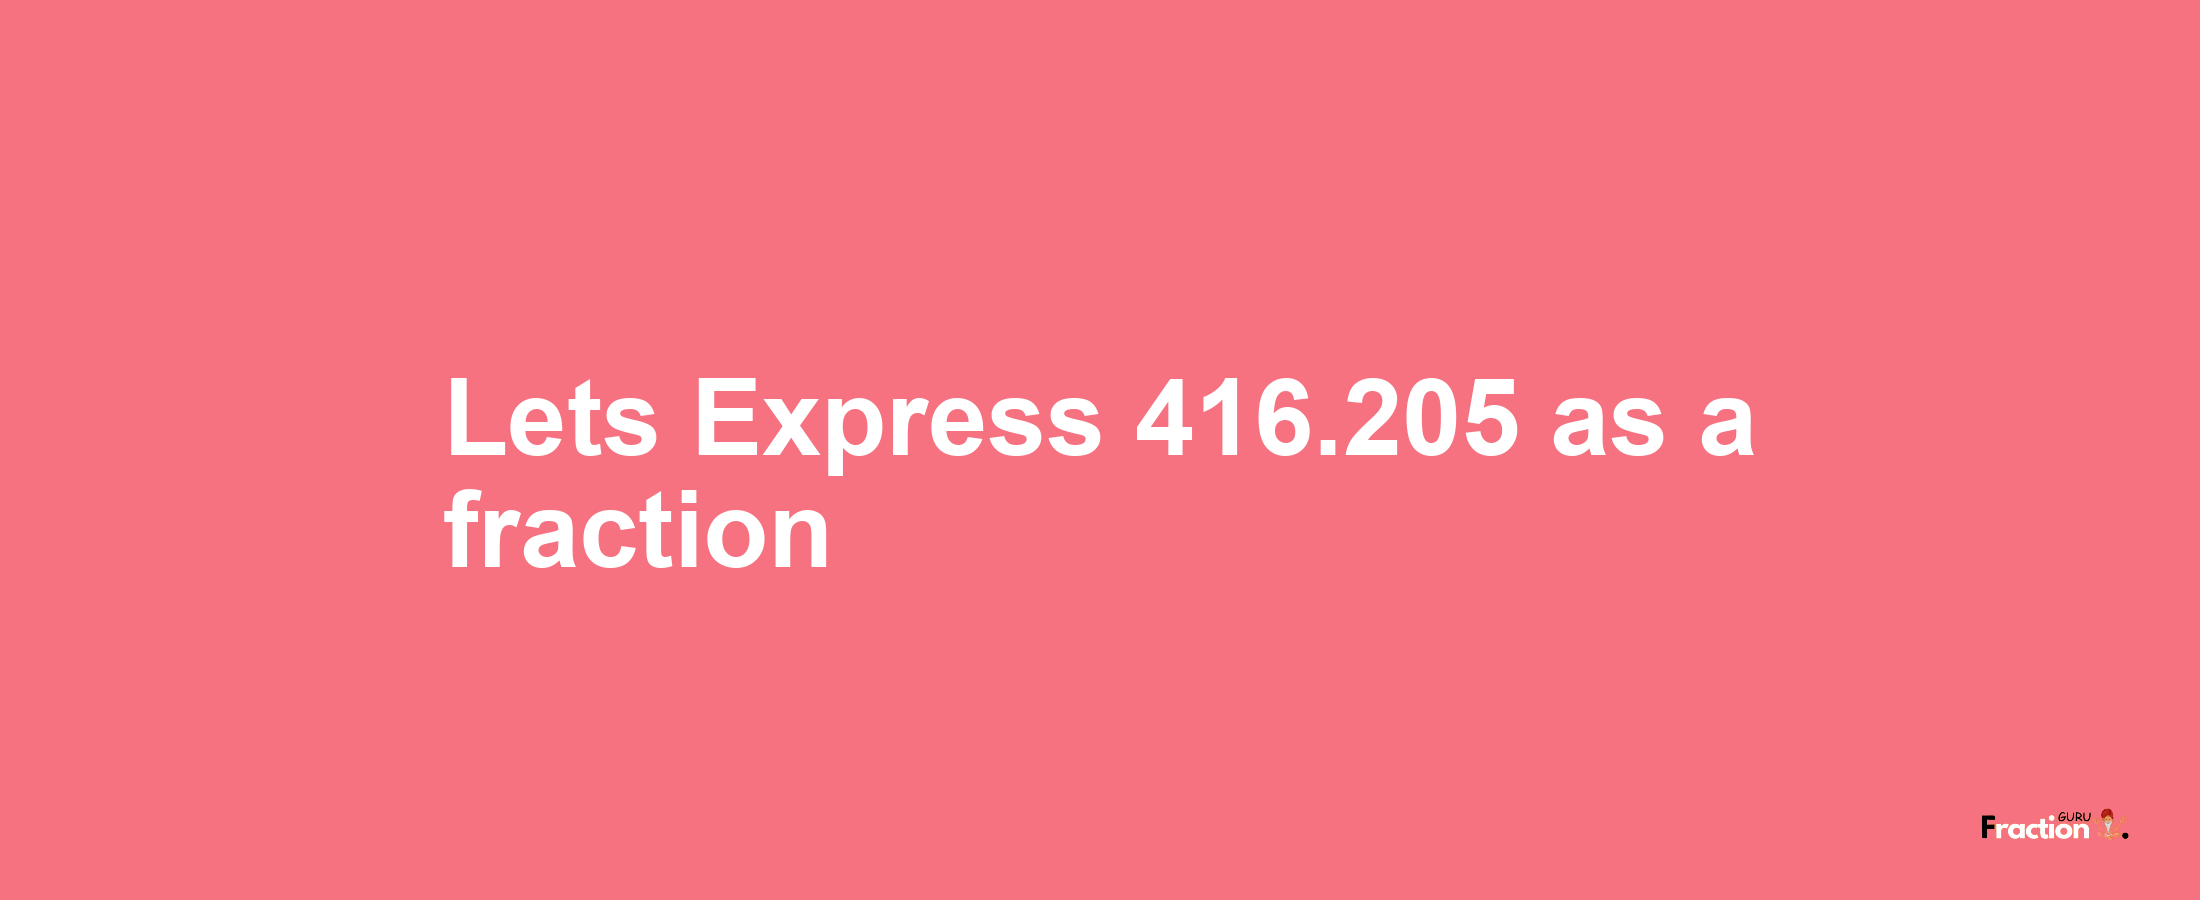 Lets Express 416.205 as afraction